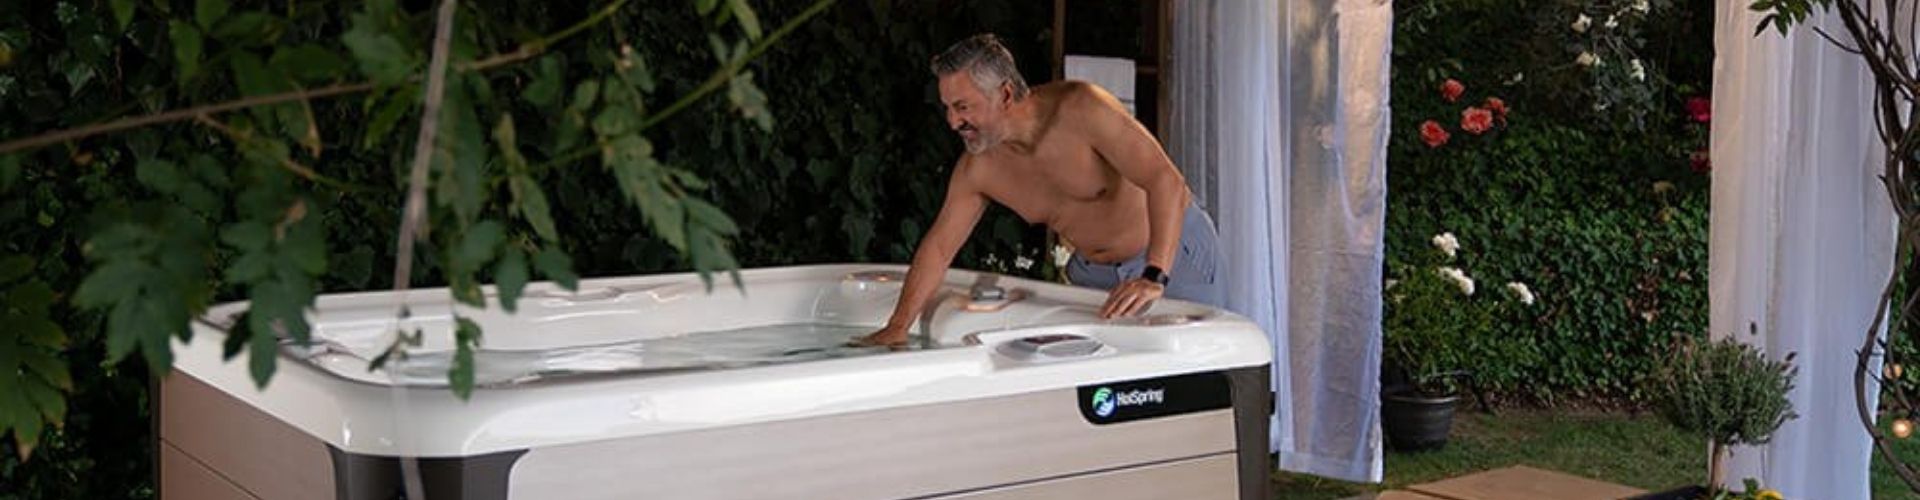 5 Reasons To Love A 2-Person Or 3-Person Hot Tub